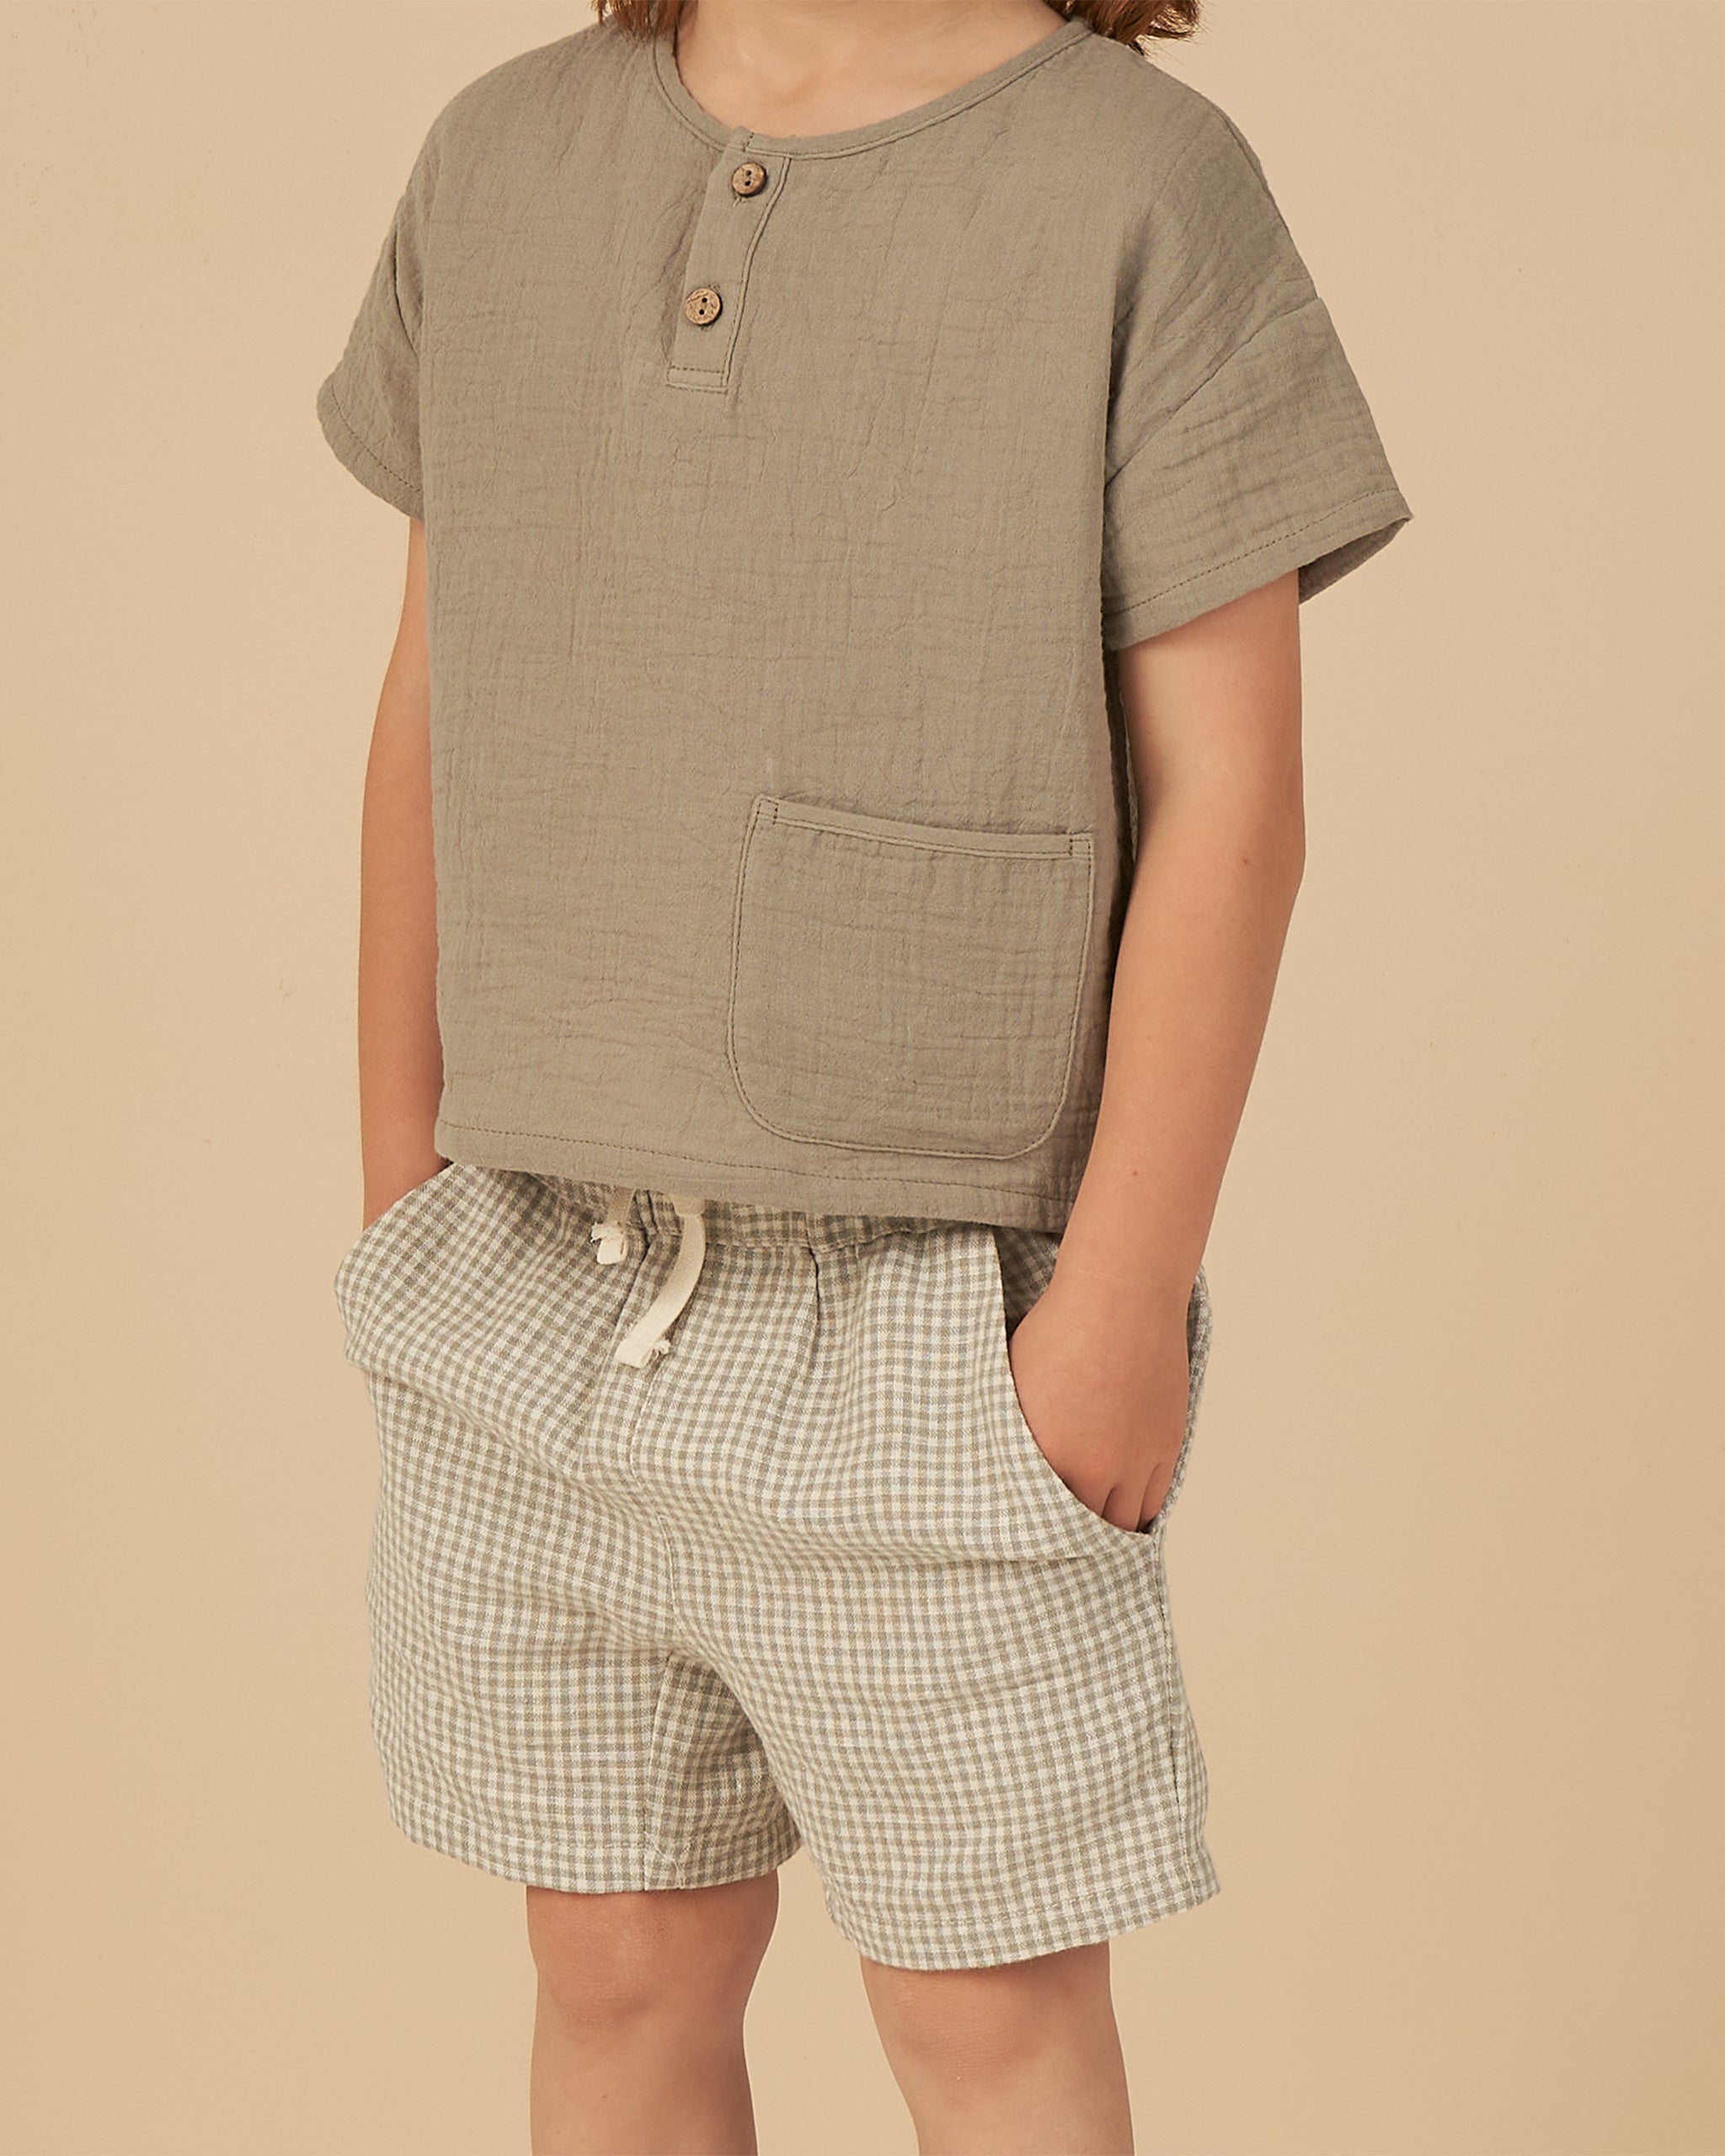 Woven Henley Tee || Sage - Rylee + Cru | Kids Clothes | Trendy Baby Clothes | Modern Infant Outfits |